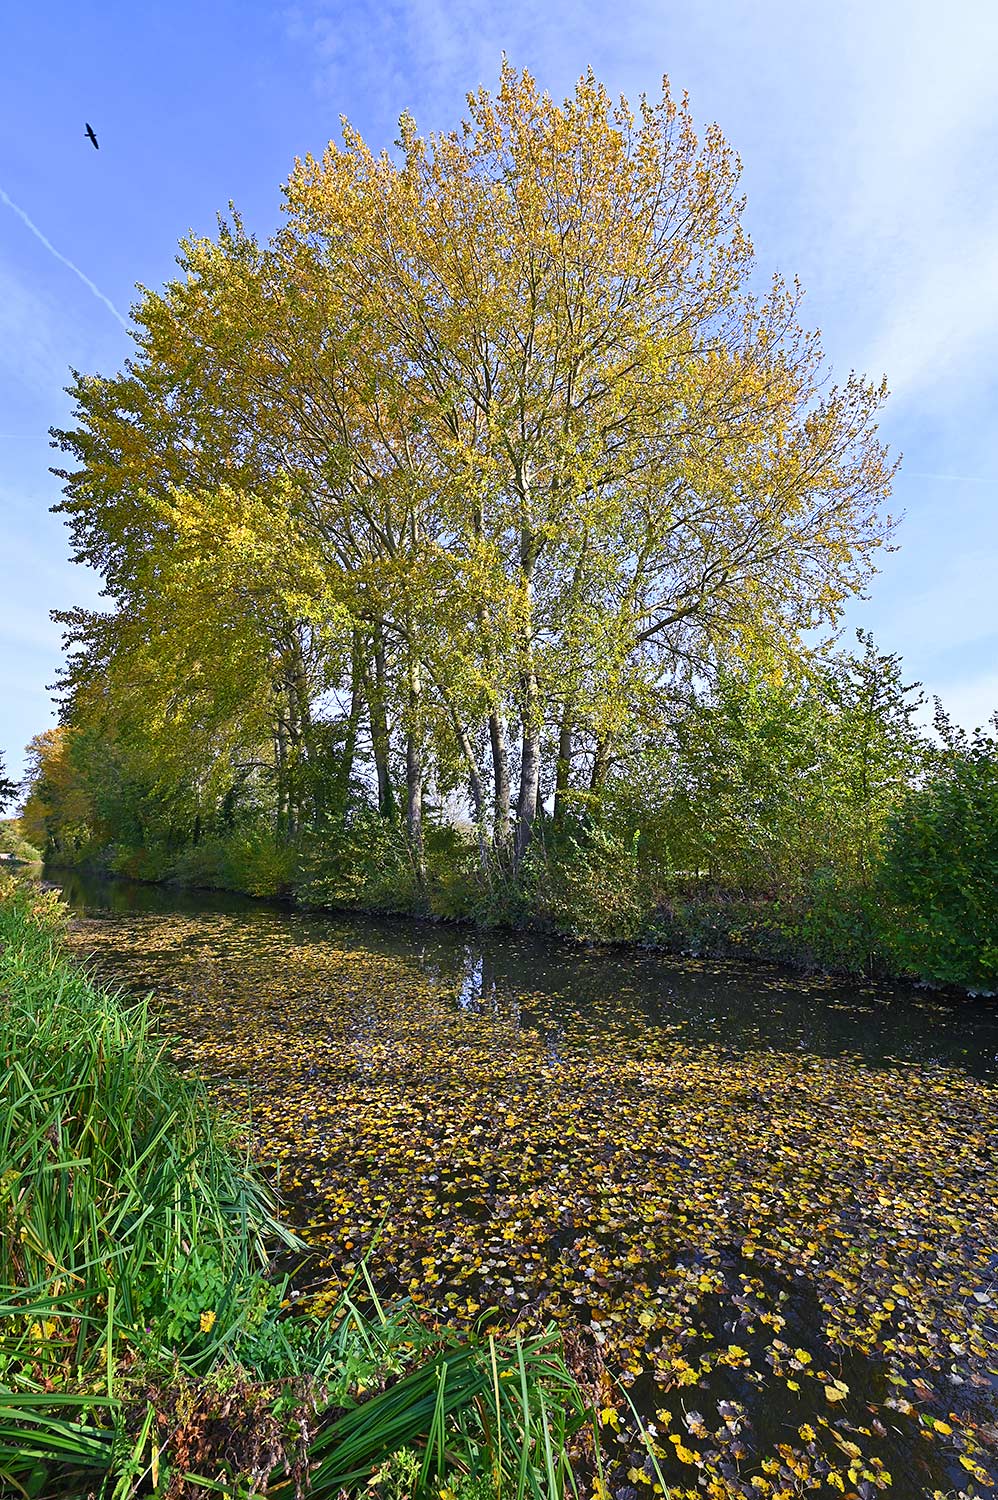 Picture of colourful autumnal trees along a canal and floating fallen leaves on the canal